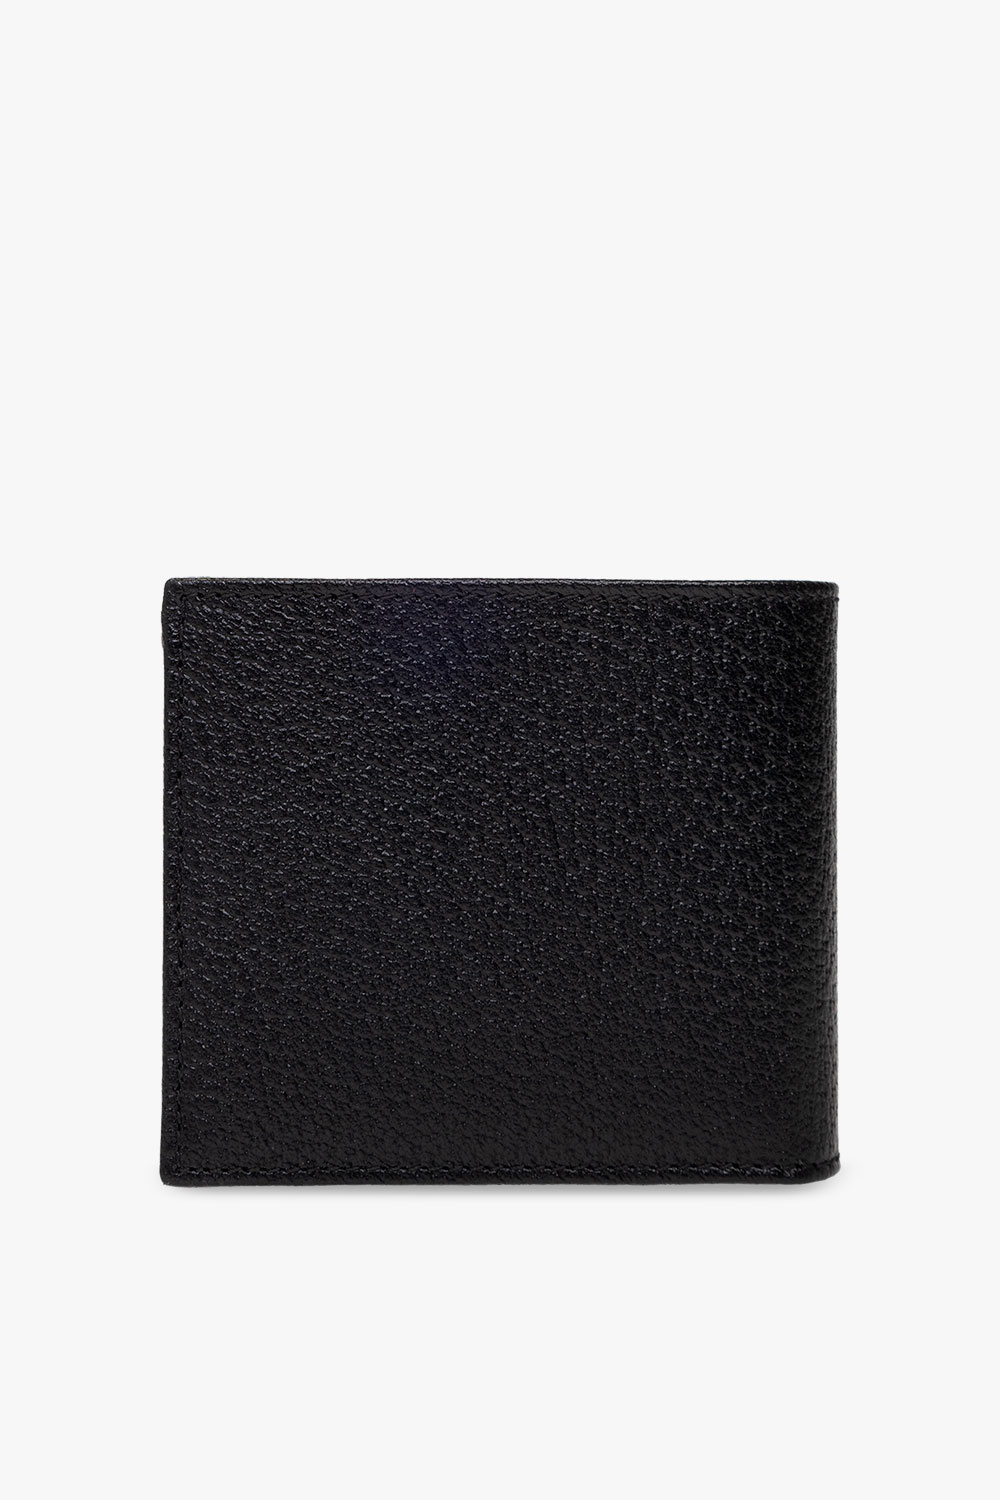 Gucci Leather bifold wallet